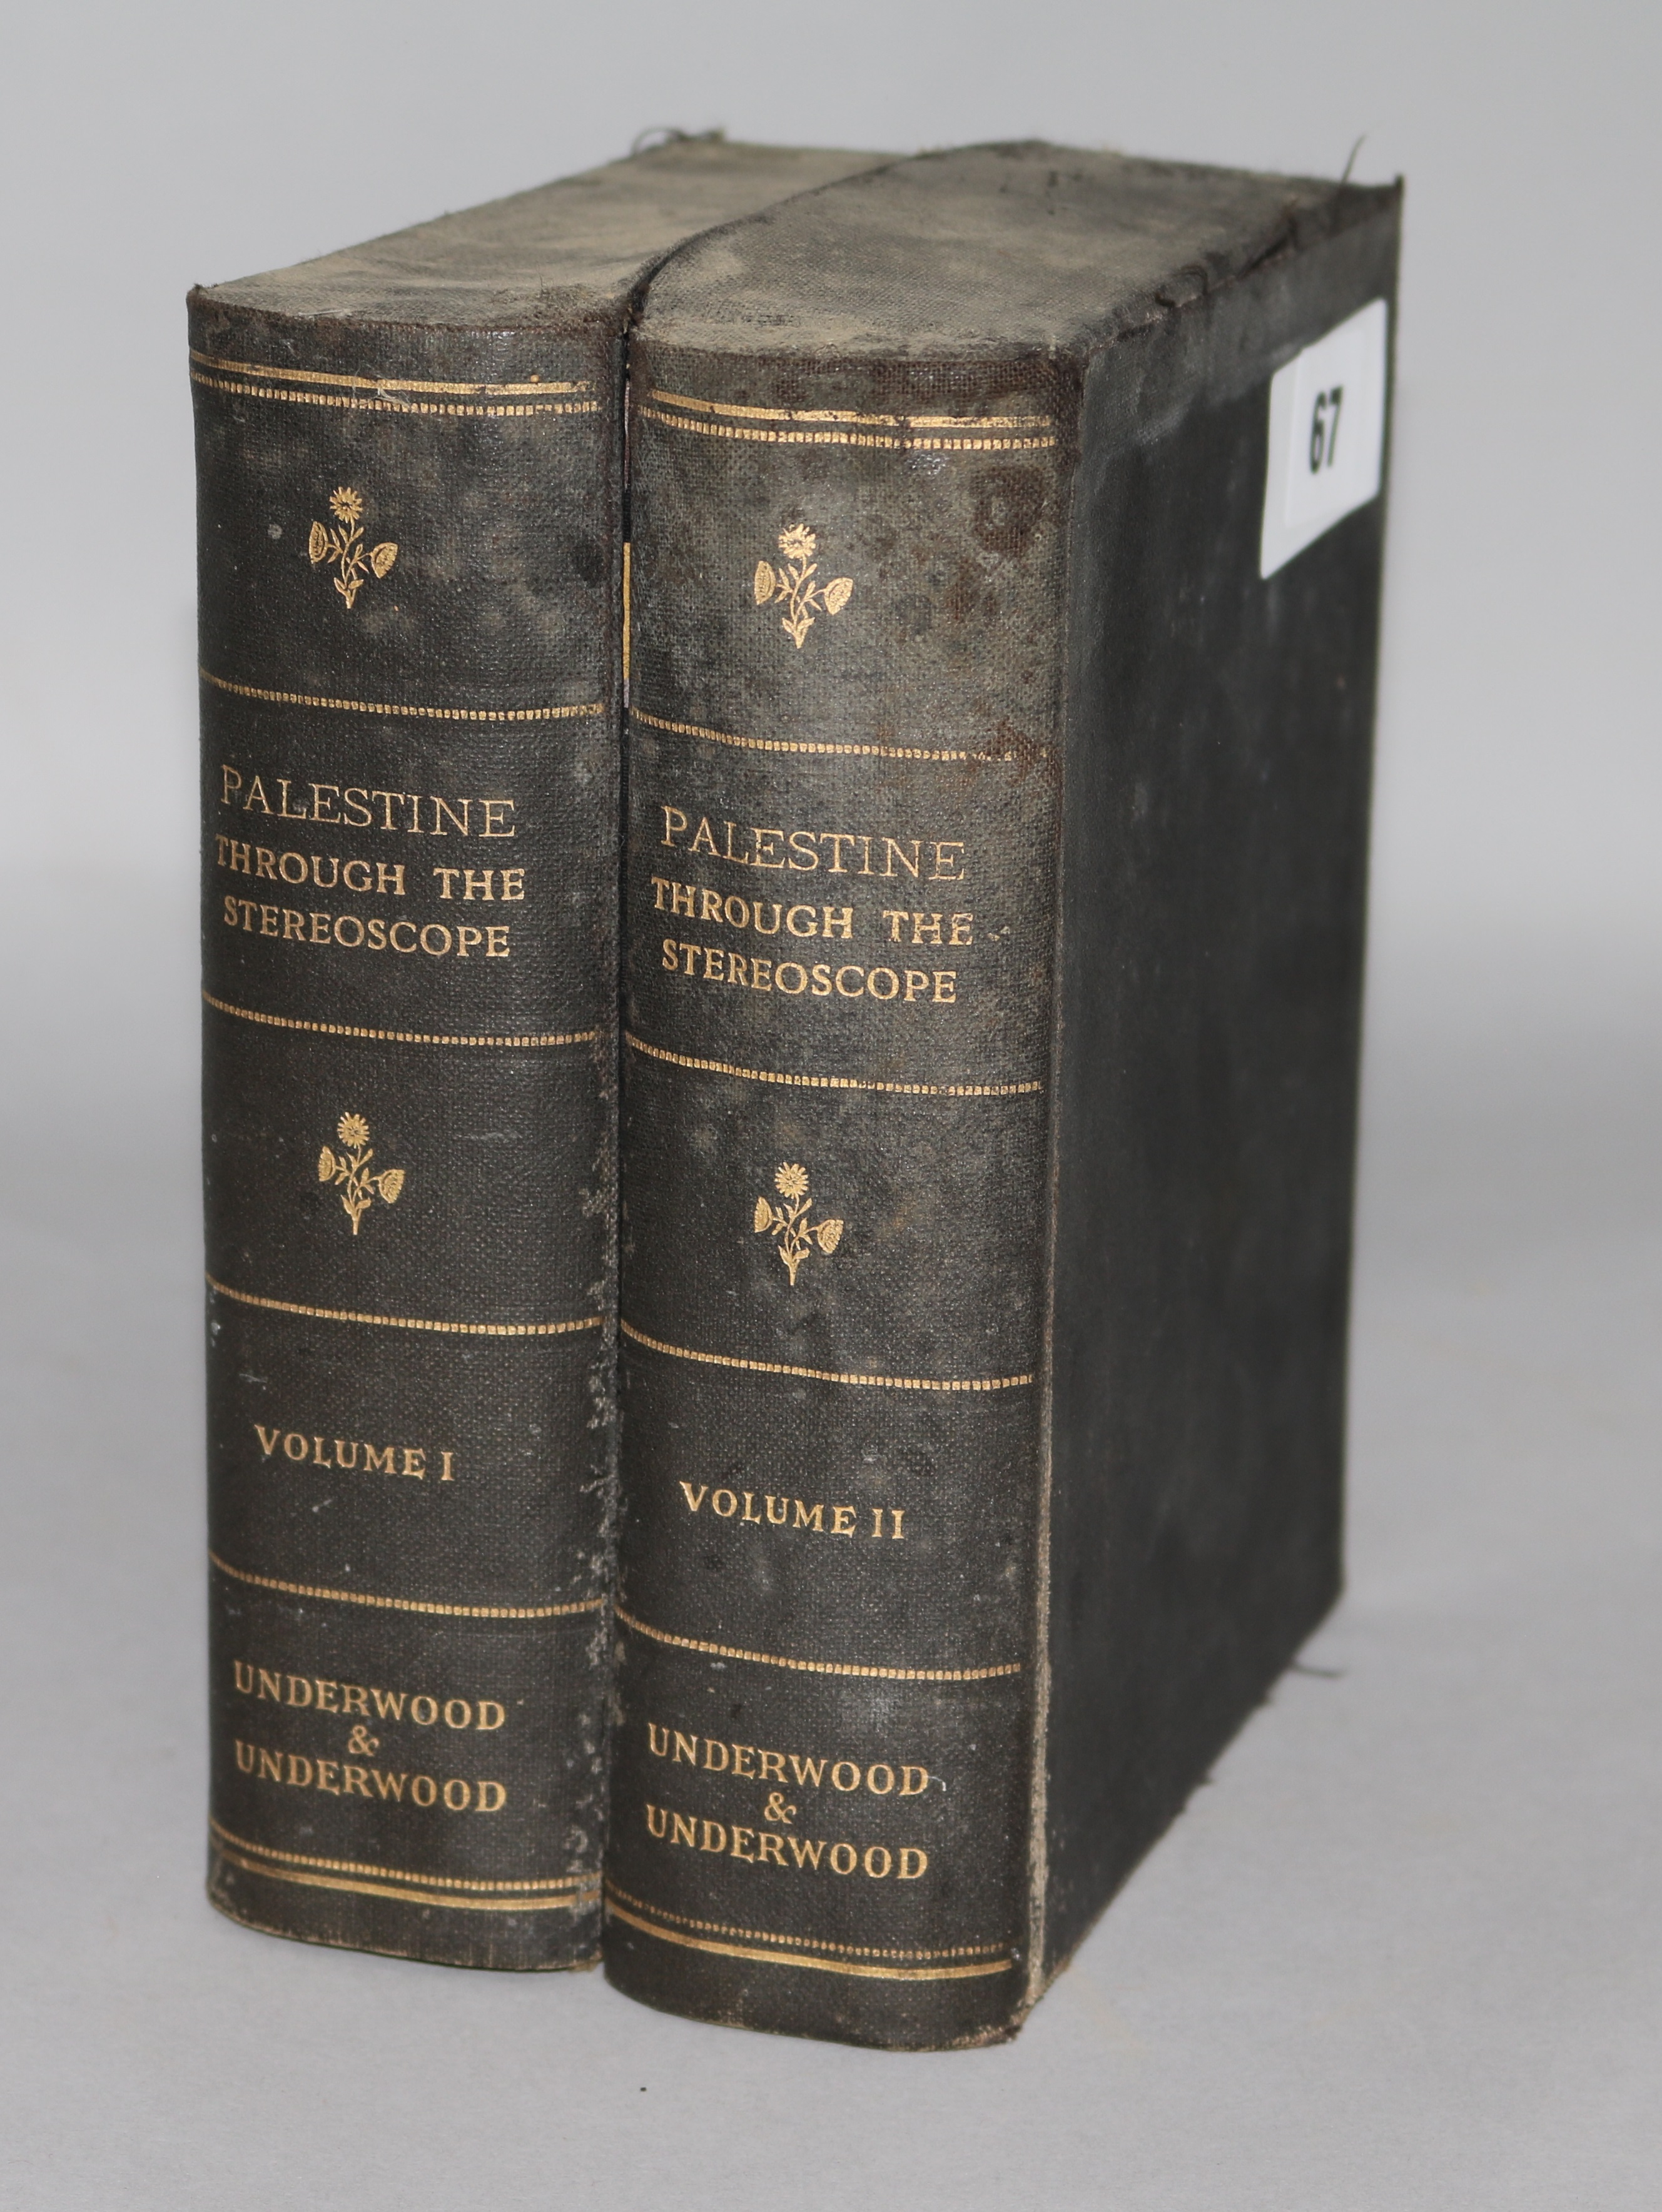 A set of Underwood & Underwood Palestine through the Stereoscope stereoscopic slides, bound as two